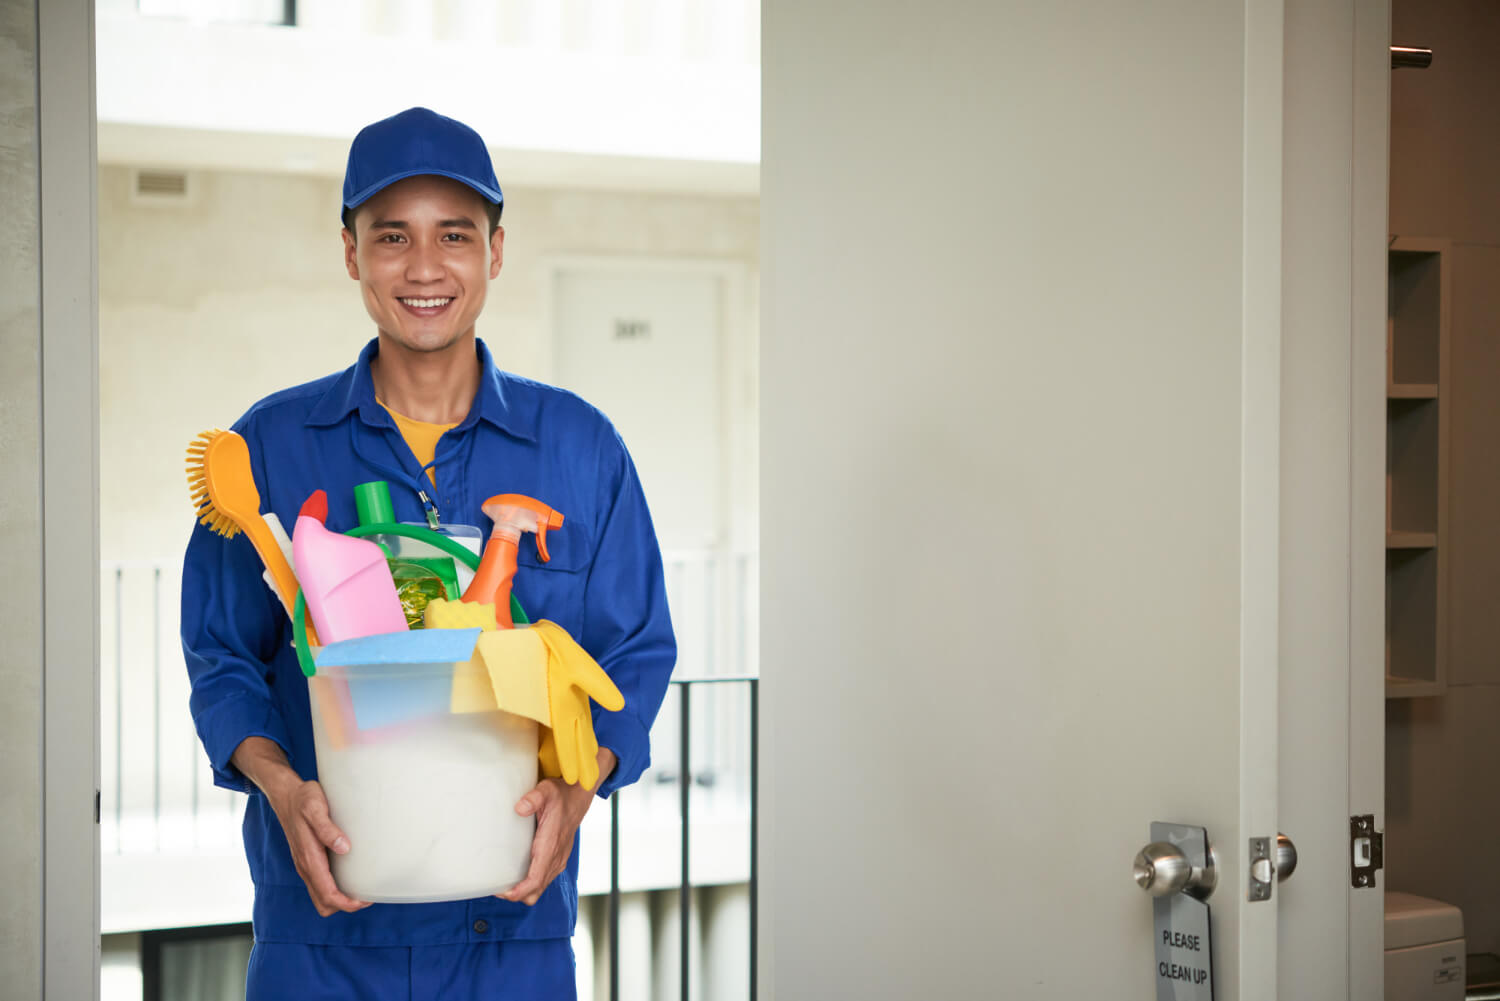 Why is Sharjah experiencing an increase in demand for cleaning services?